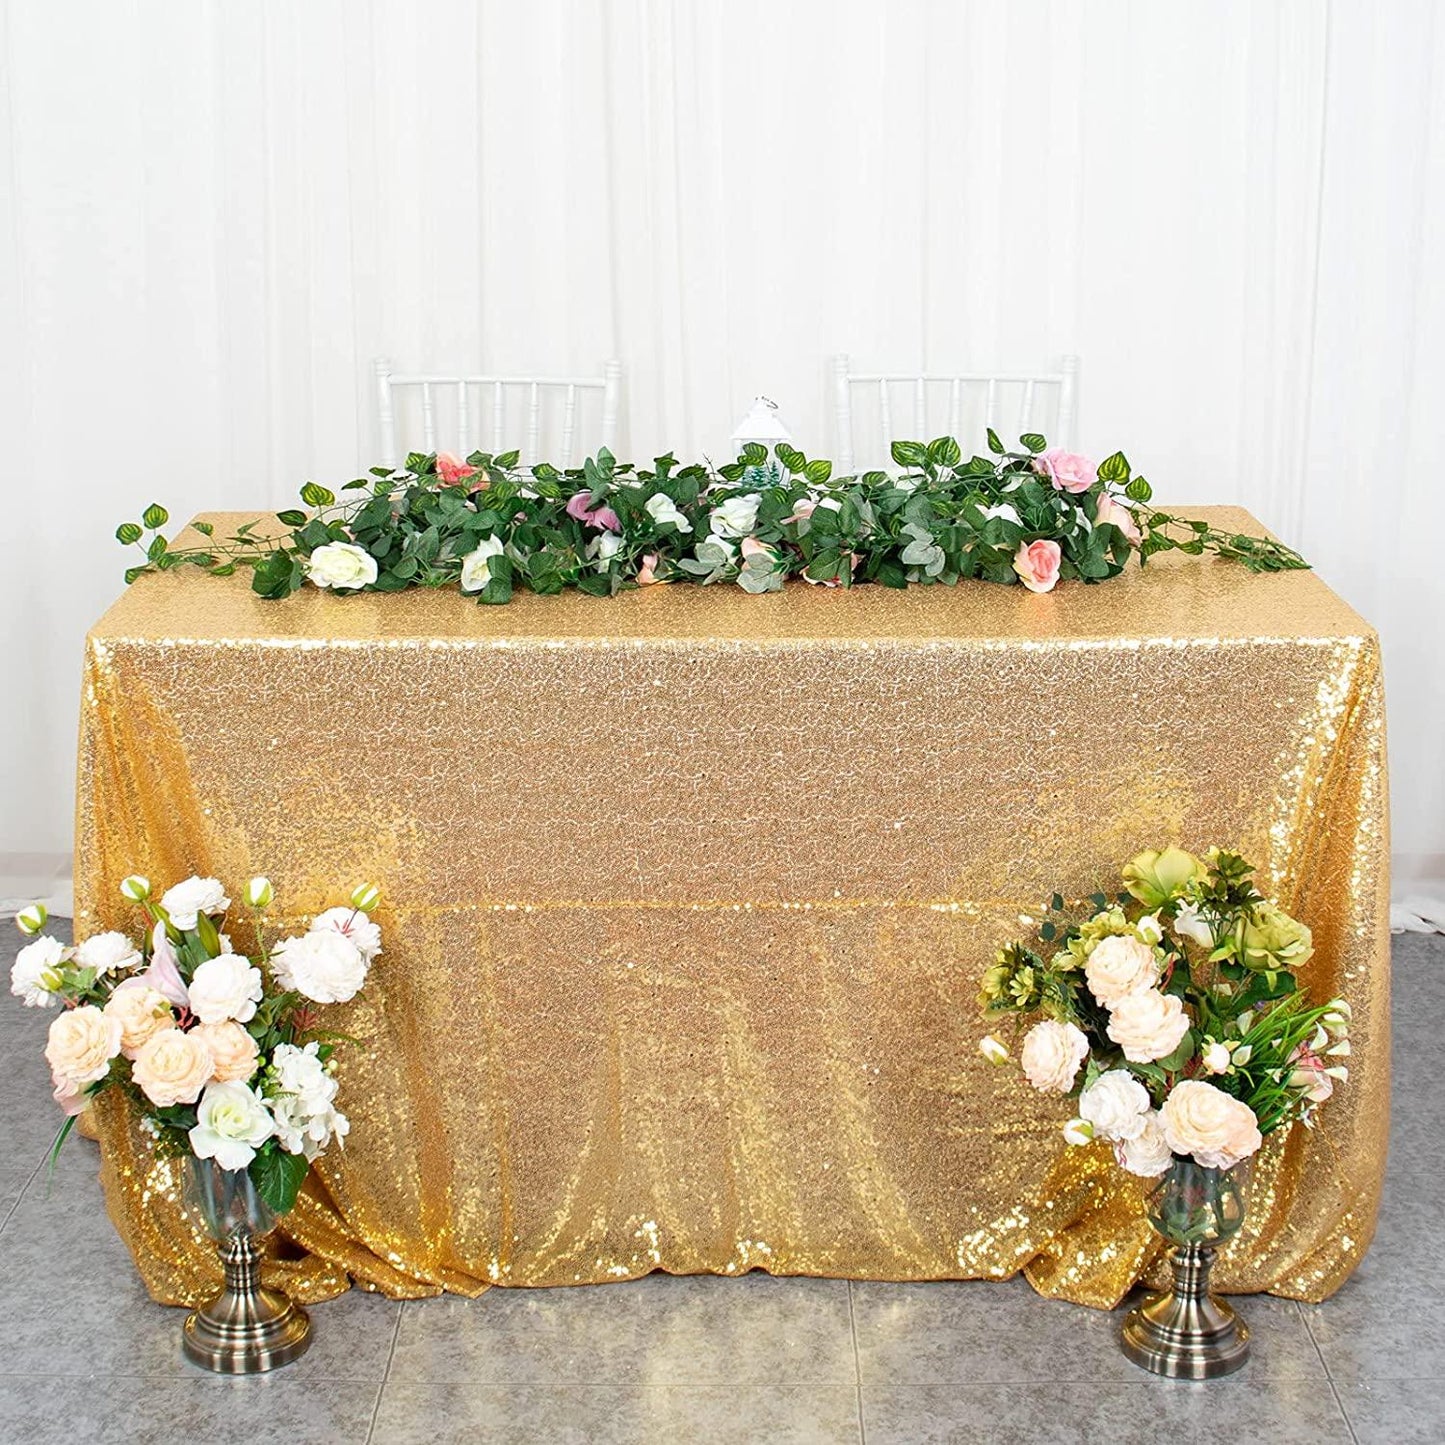 50''x50'' Square Silver Sequin Tablecloth Select Your Color & Size Can Be Available ! Sequin Overlays, Runners, Gatsby Wedding, Glam Wedding Decor - If you say i do